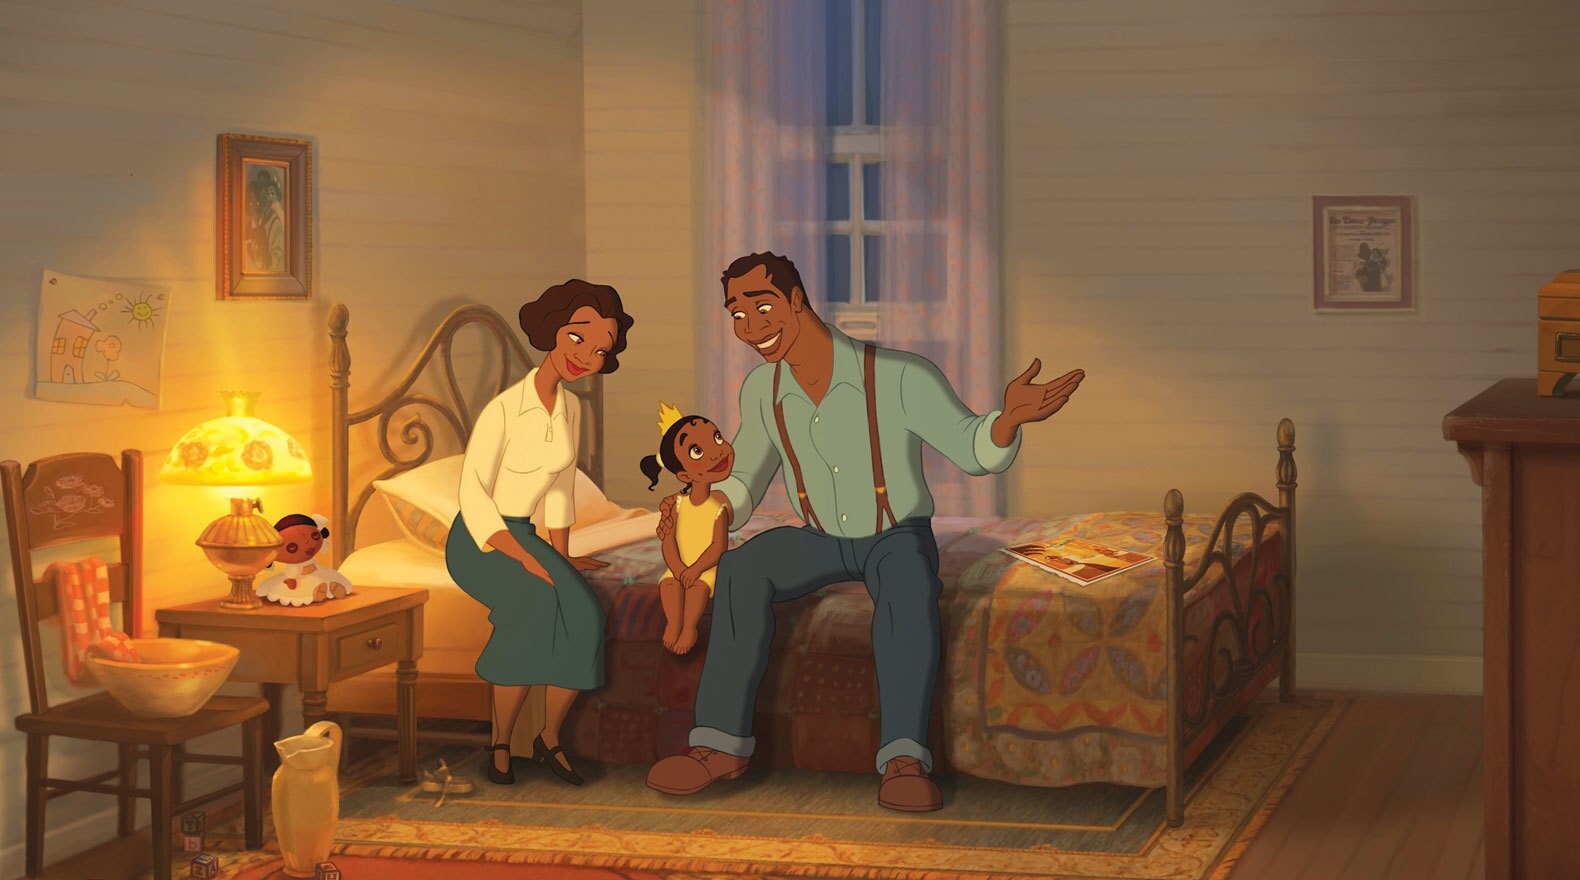 Tiana sits with her mother Eudora and James her father